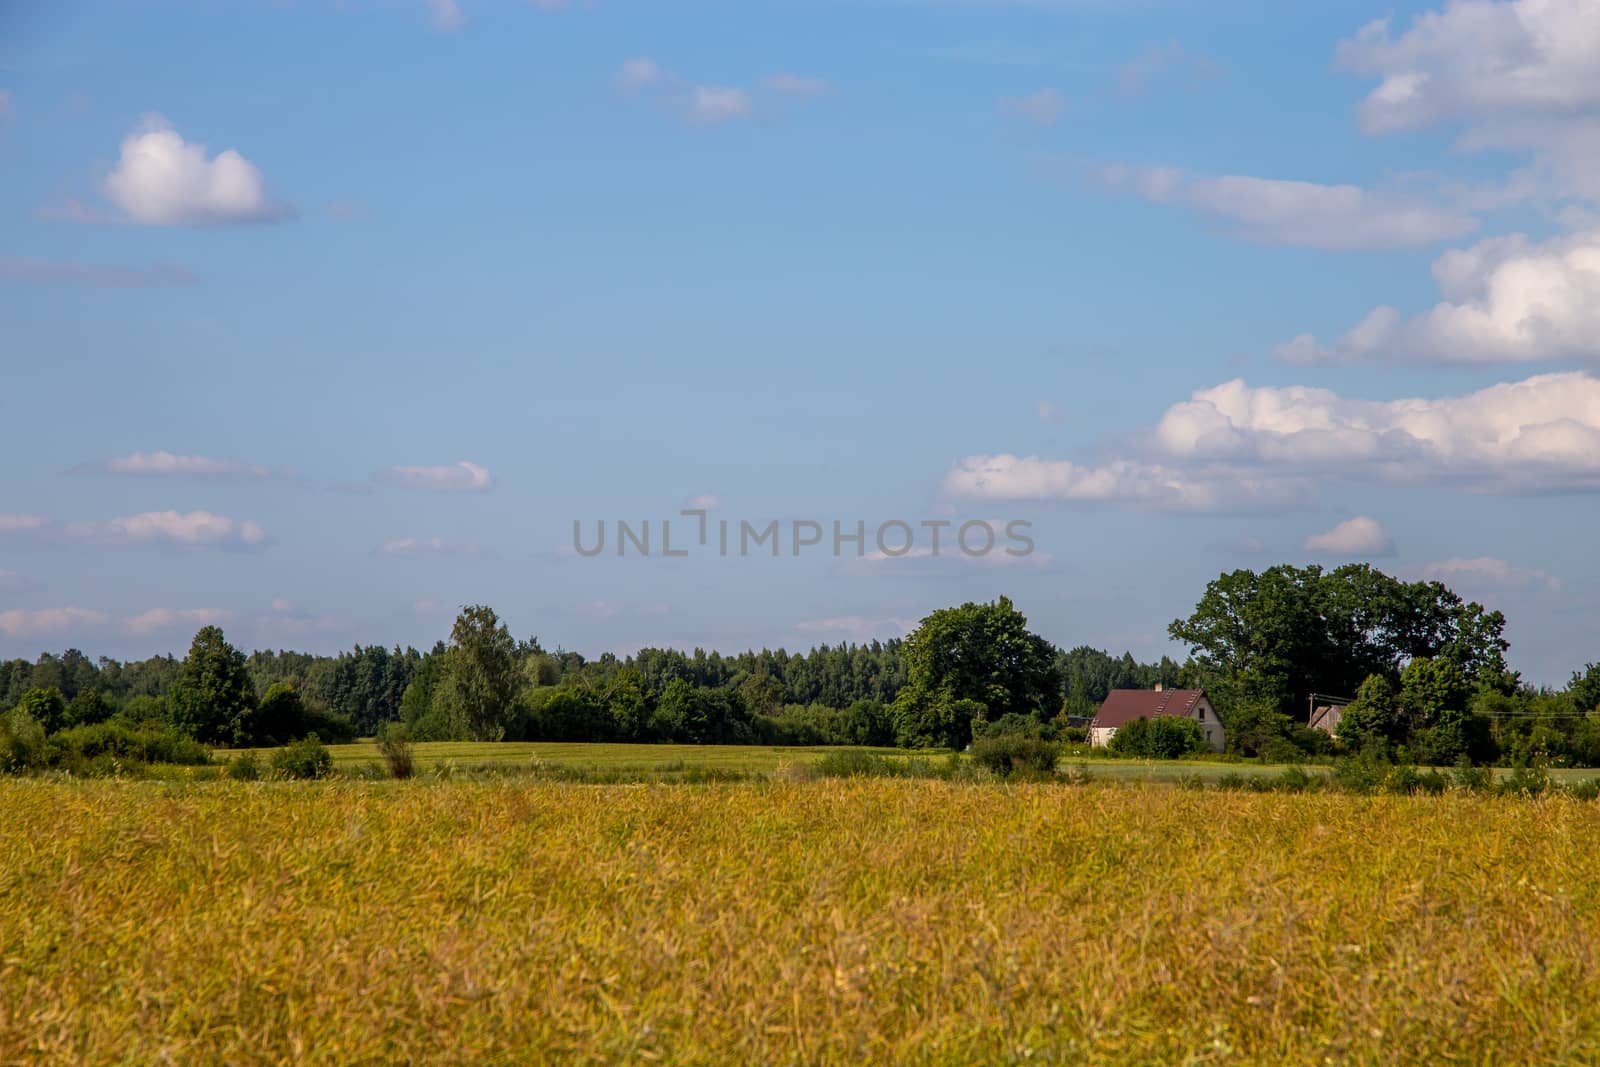 Landscape with cereal field, trees and blue sky by fotorobs